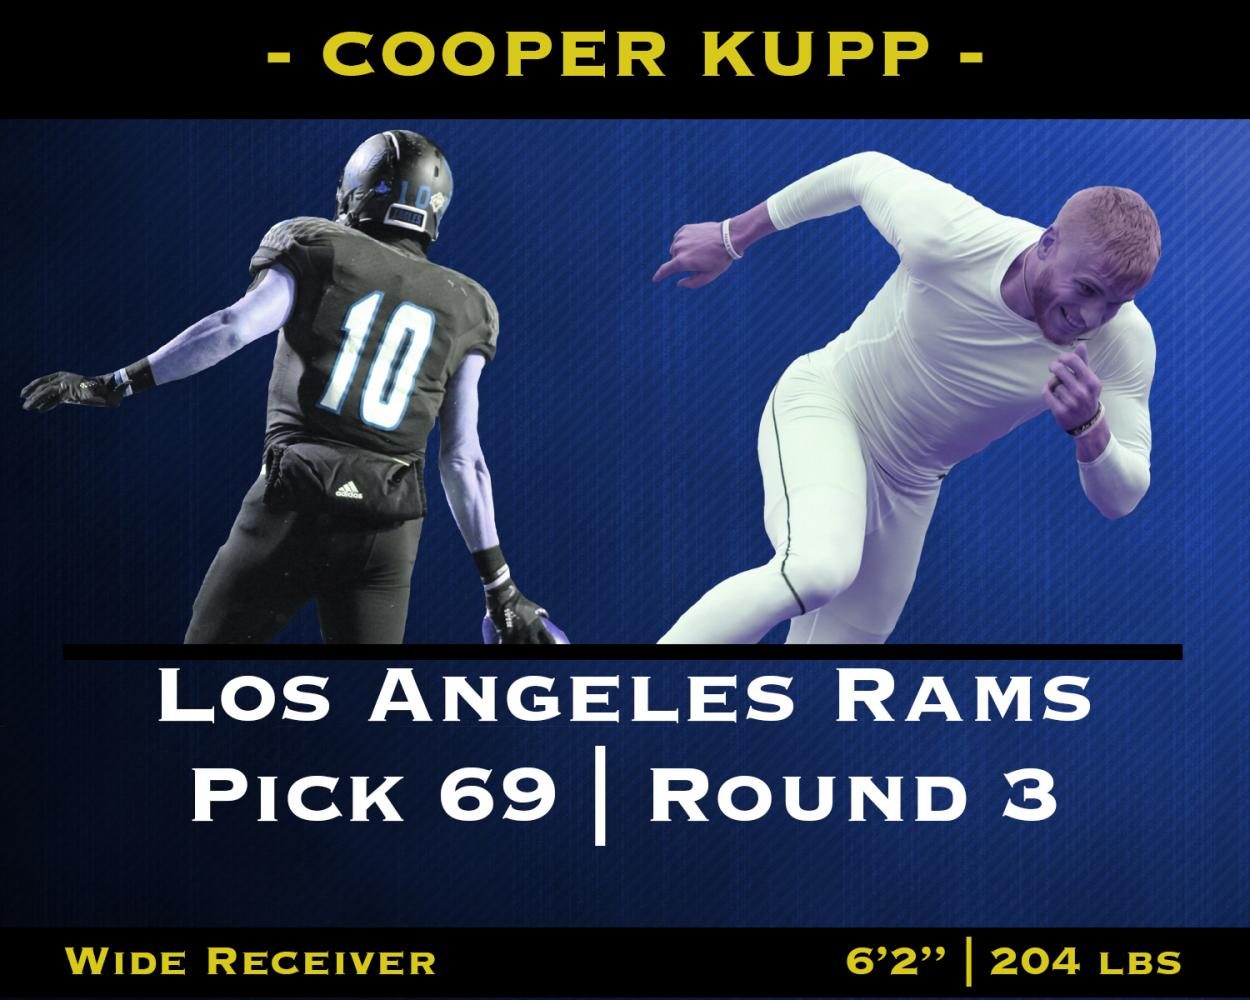 2017 NFL Draft: EWUs Cooper Kupp and Samson Ebukam Drafted by the Los Angeles Rams